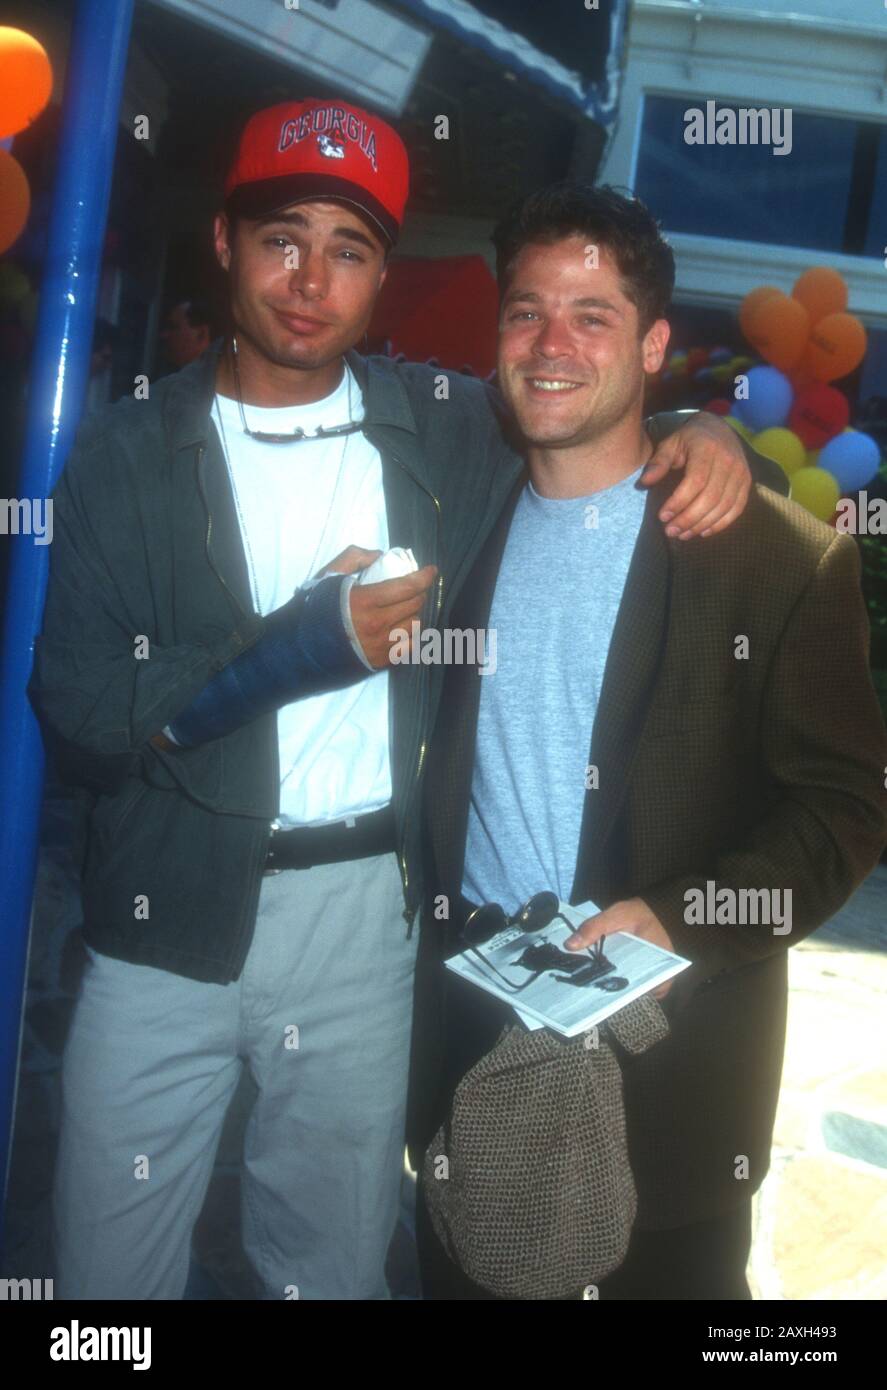 Westwood, California, USa 9th July 1995 Actor Matt Borlenghi and actor David Barry Gray attend Warner Bros. Pictures' 'Free Willy 2: The Adventure Home' Premiere on July 9, 1995 at Mann Village Theatre in Westwood, California, USA. Photo by Barry King/Alamy Stock Photo Stock Photo